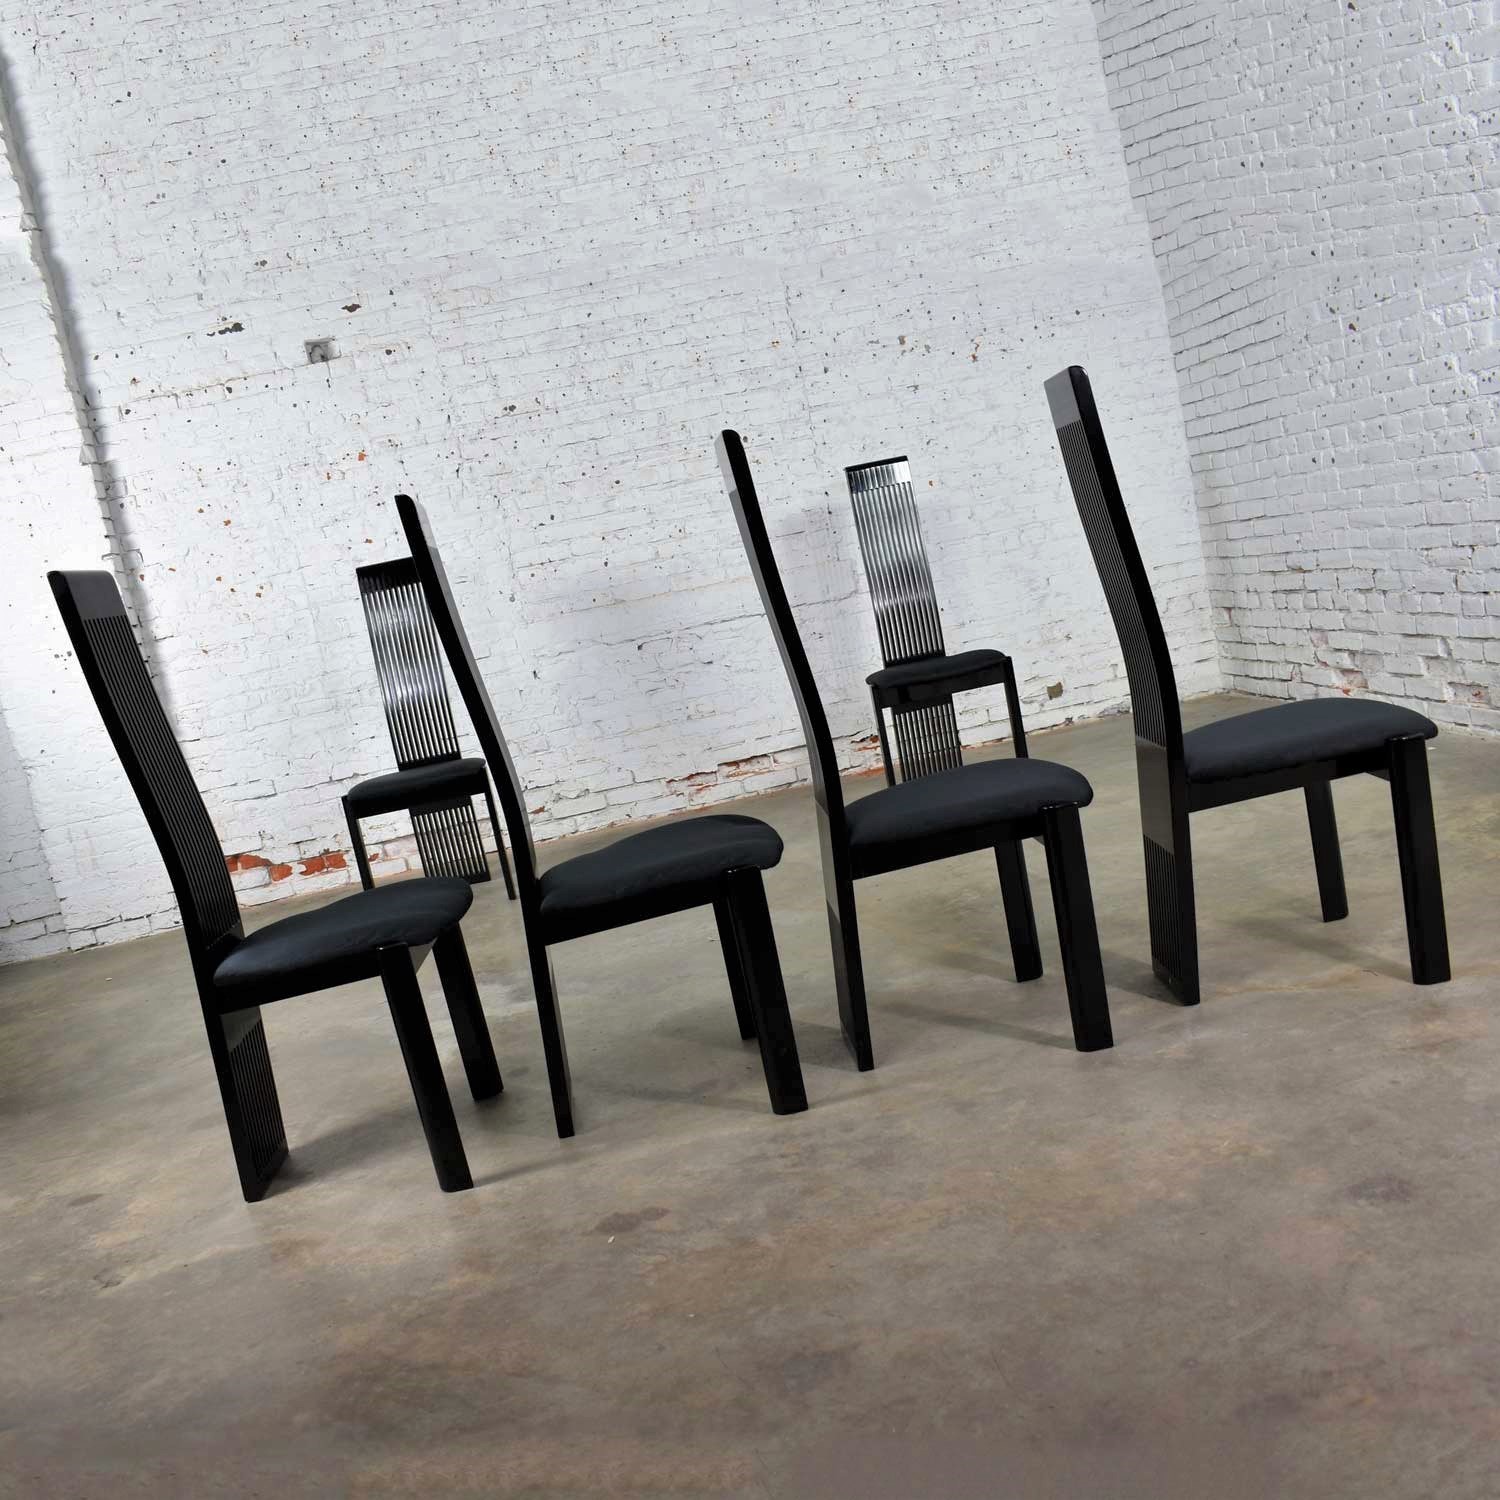 Six Tripod Post Modern Black Lacquer Dining Chairs by Pietro Costantini Made in Italy